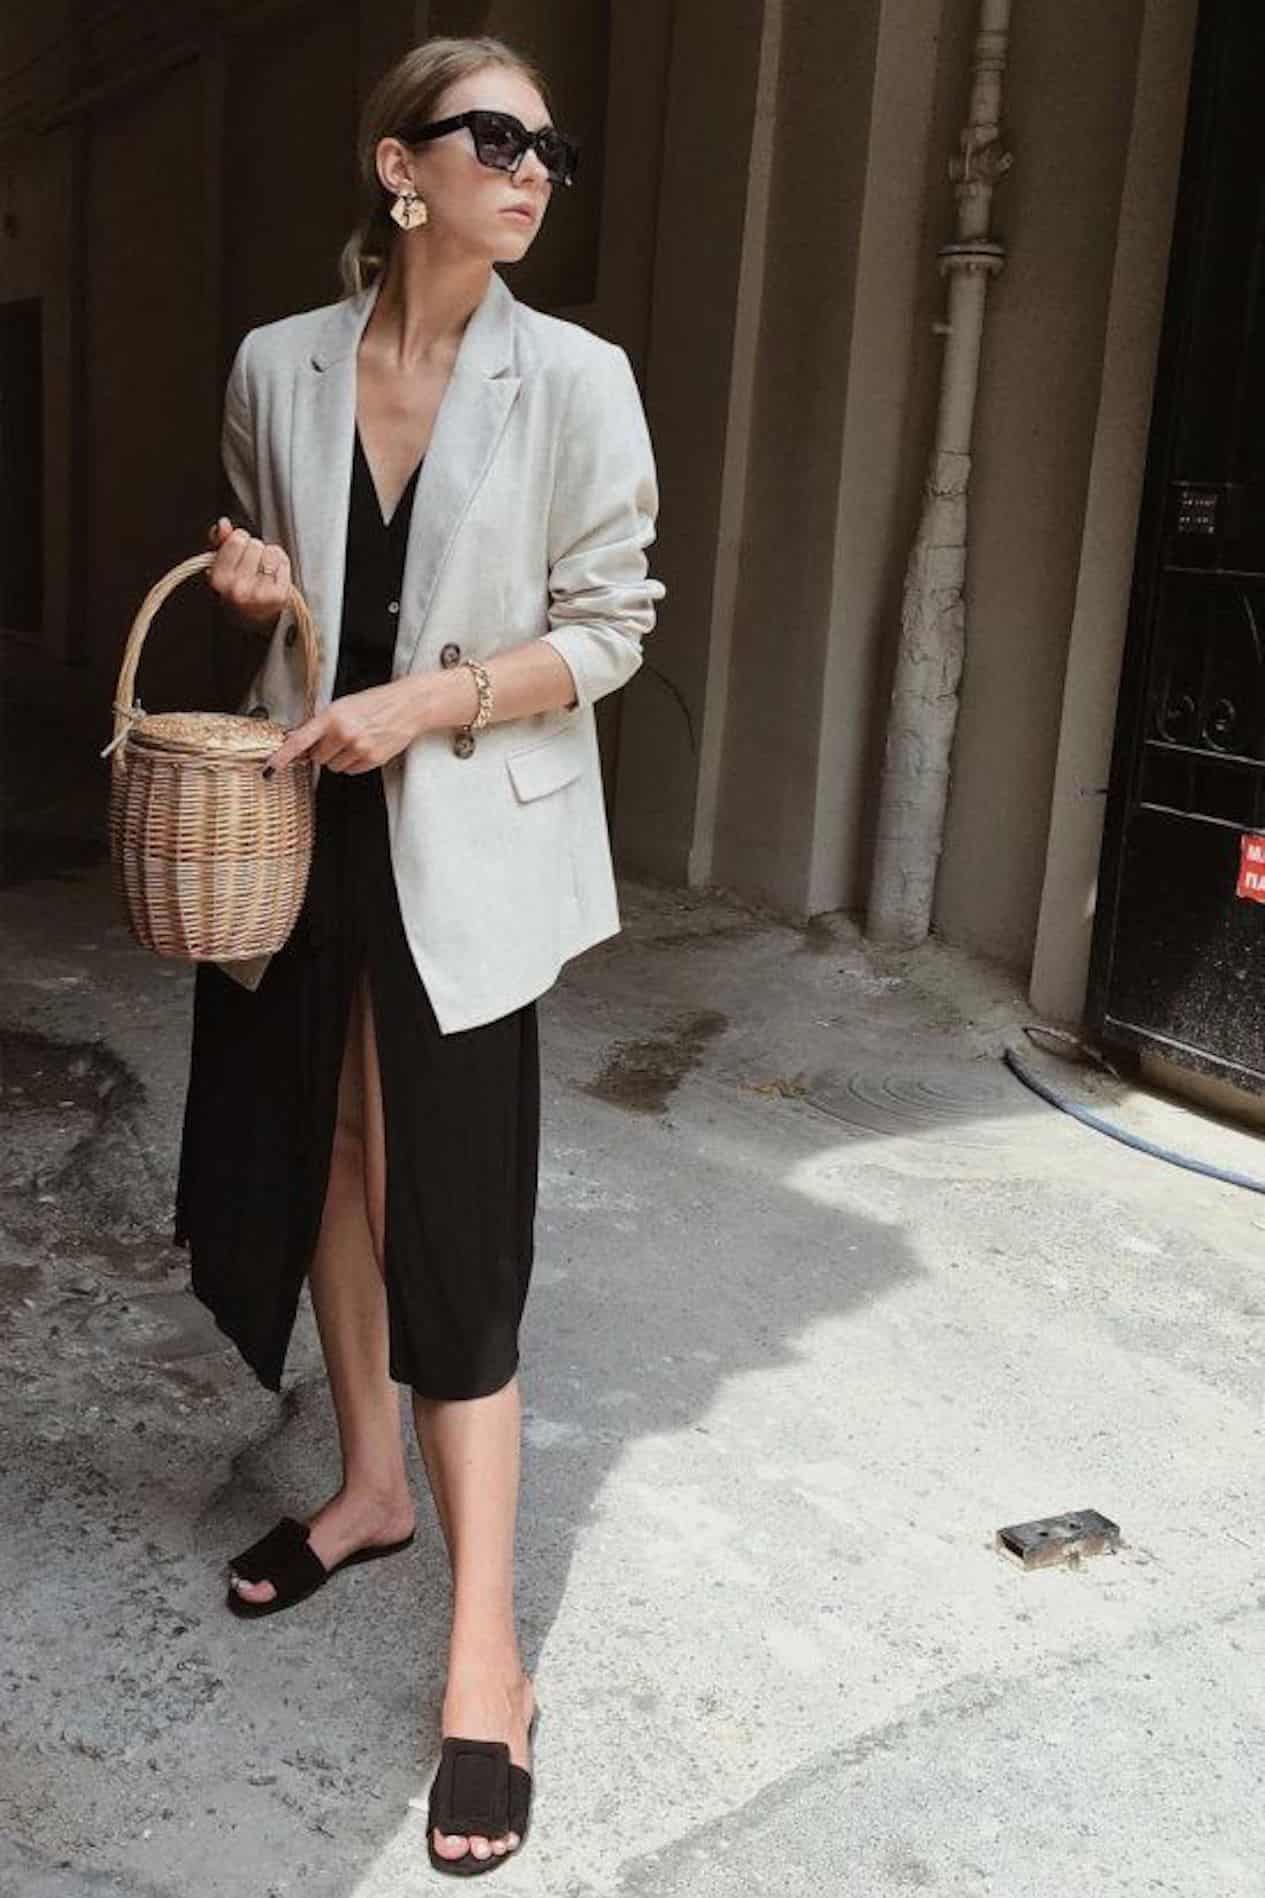 image of a woman with a black dress and linen blazer on holding a round basket bag and wearing black sandals